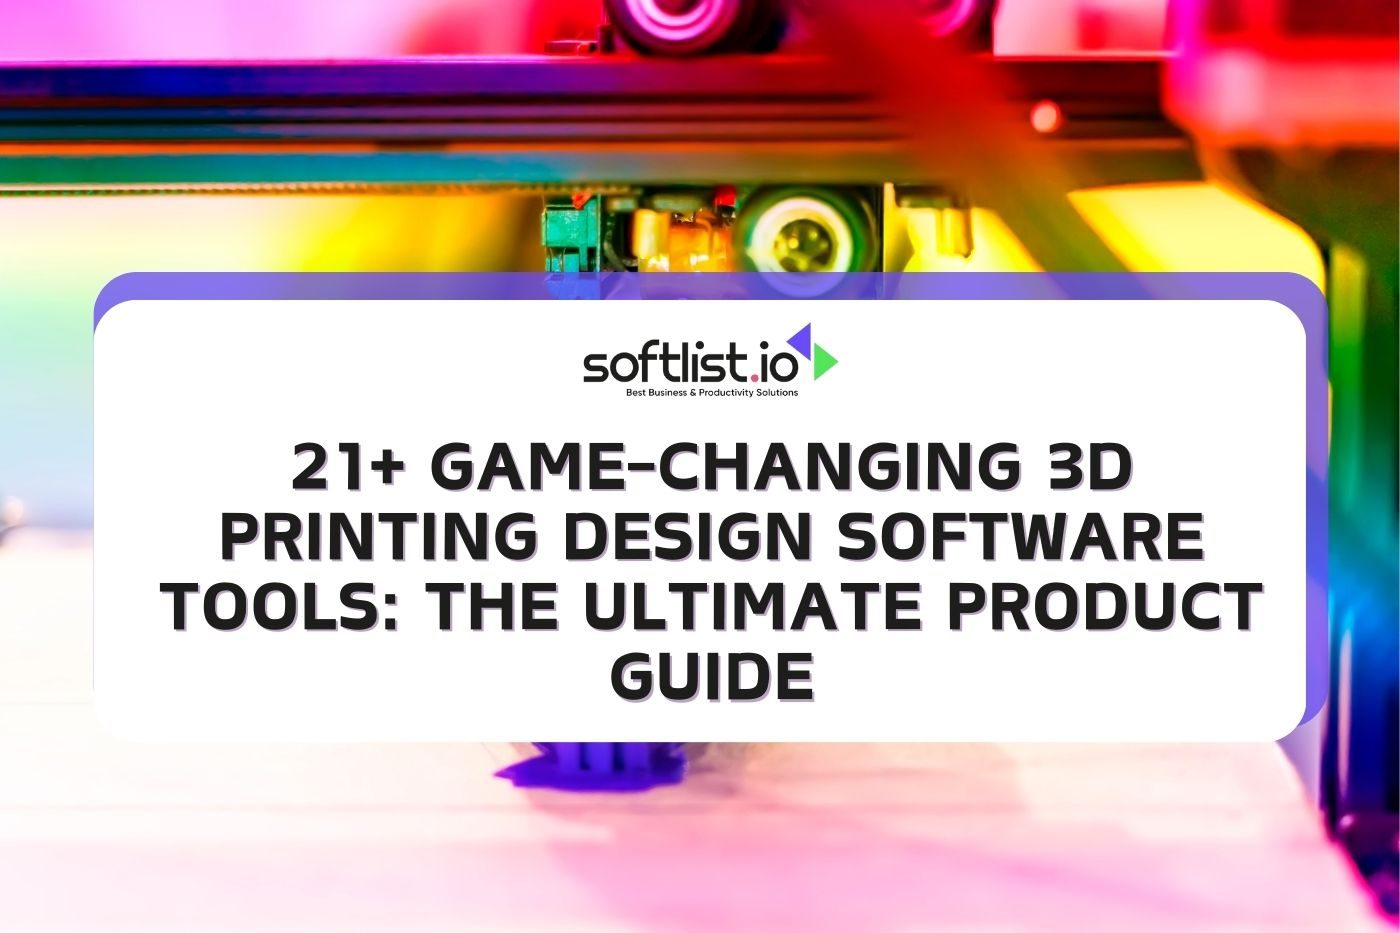 21+ Game-Changing 3D Printing Design Software Tools: The Ultimate Product Guide